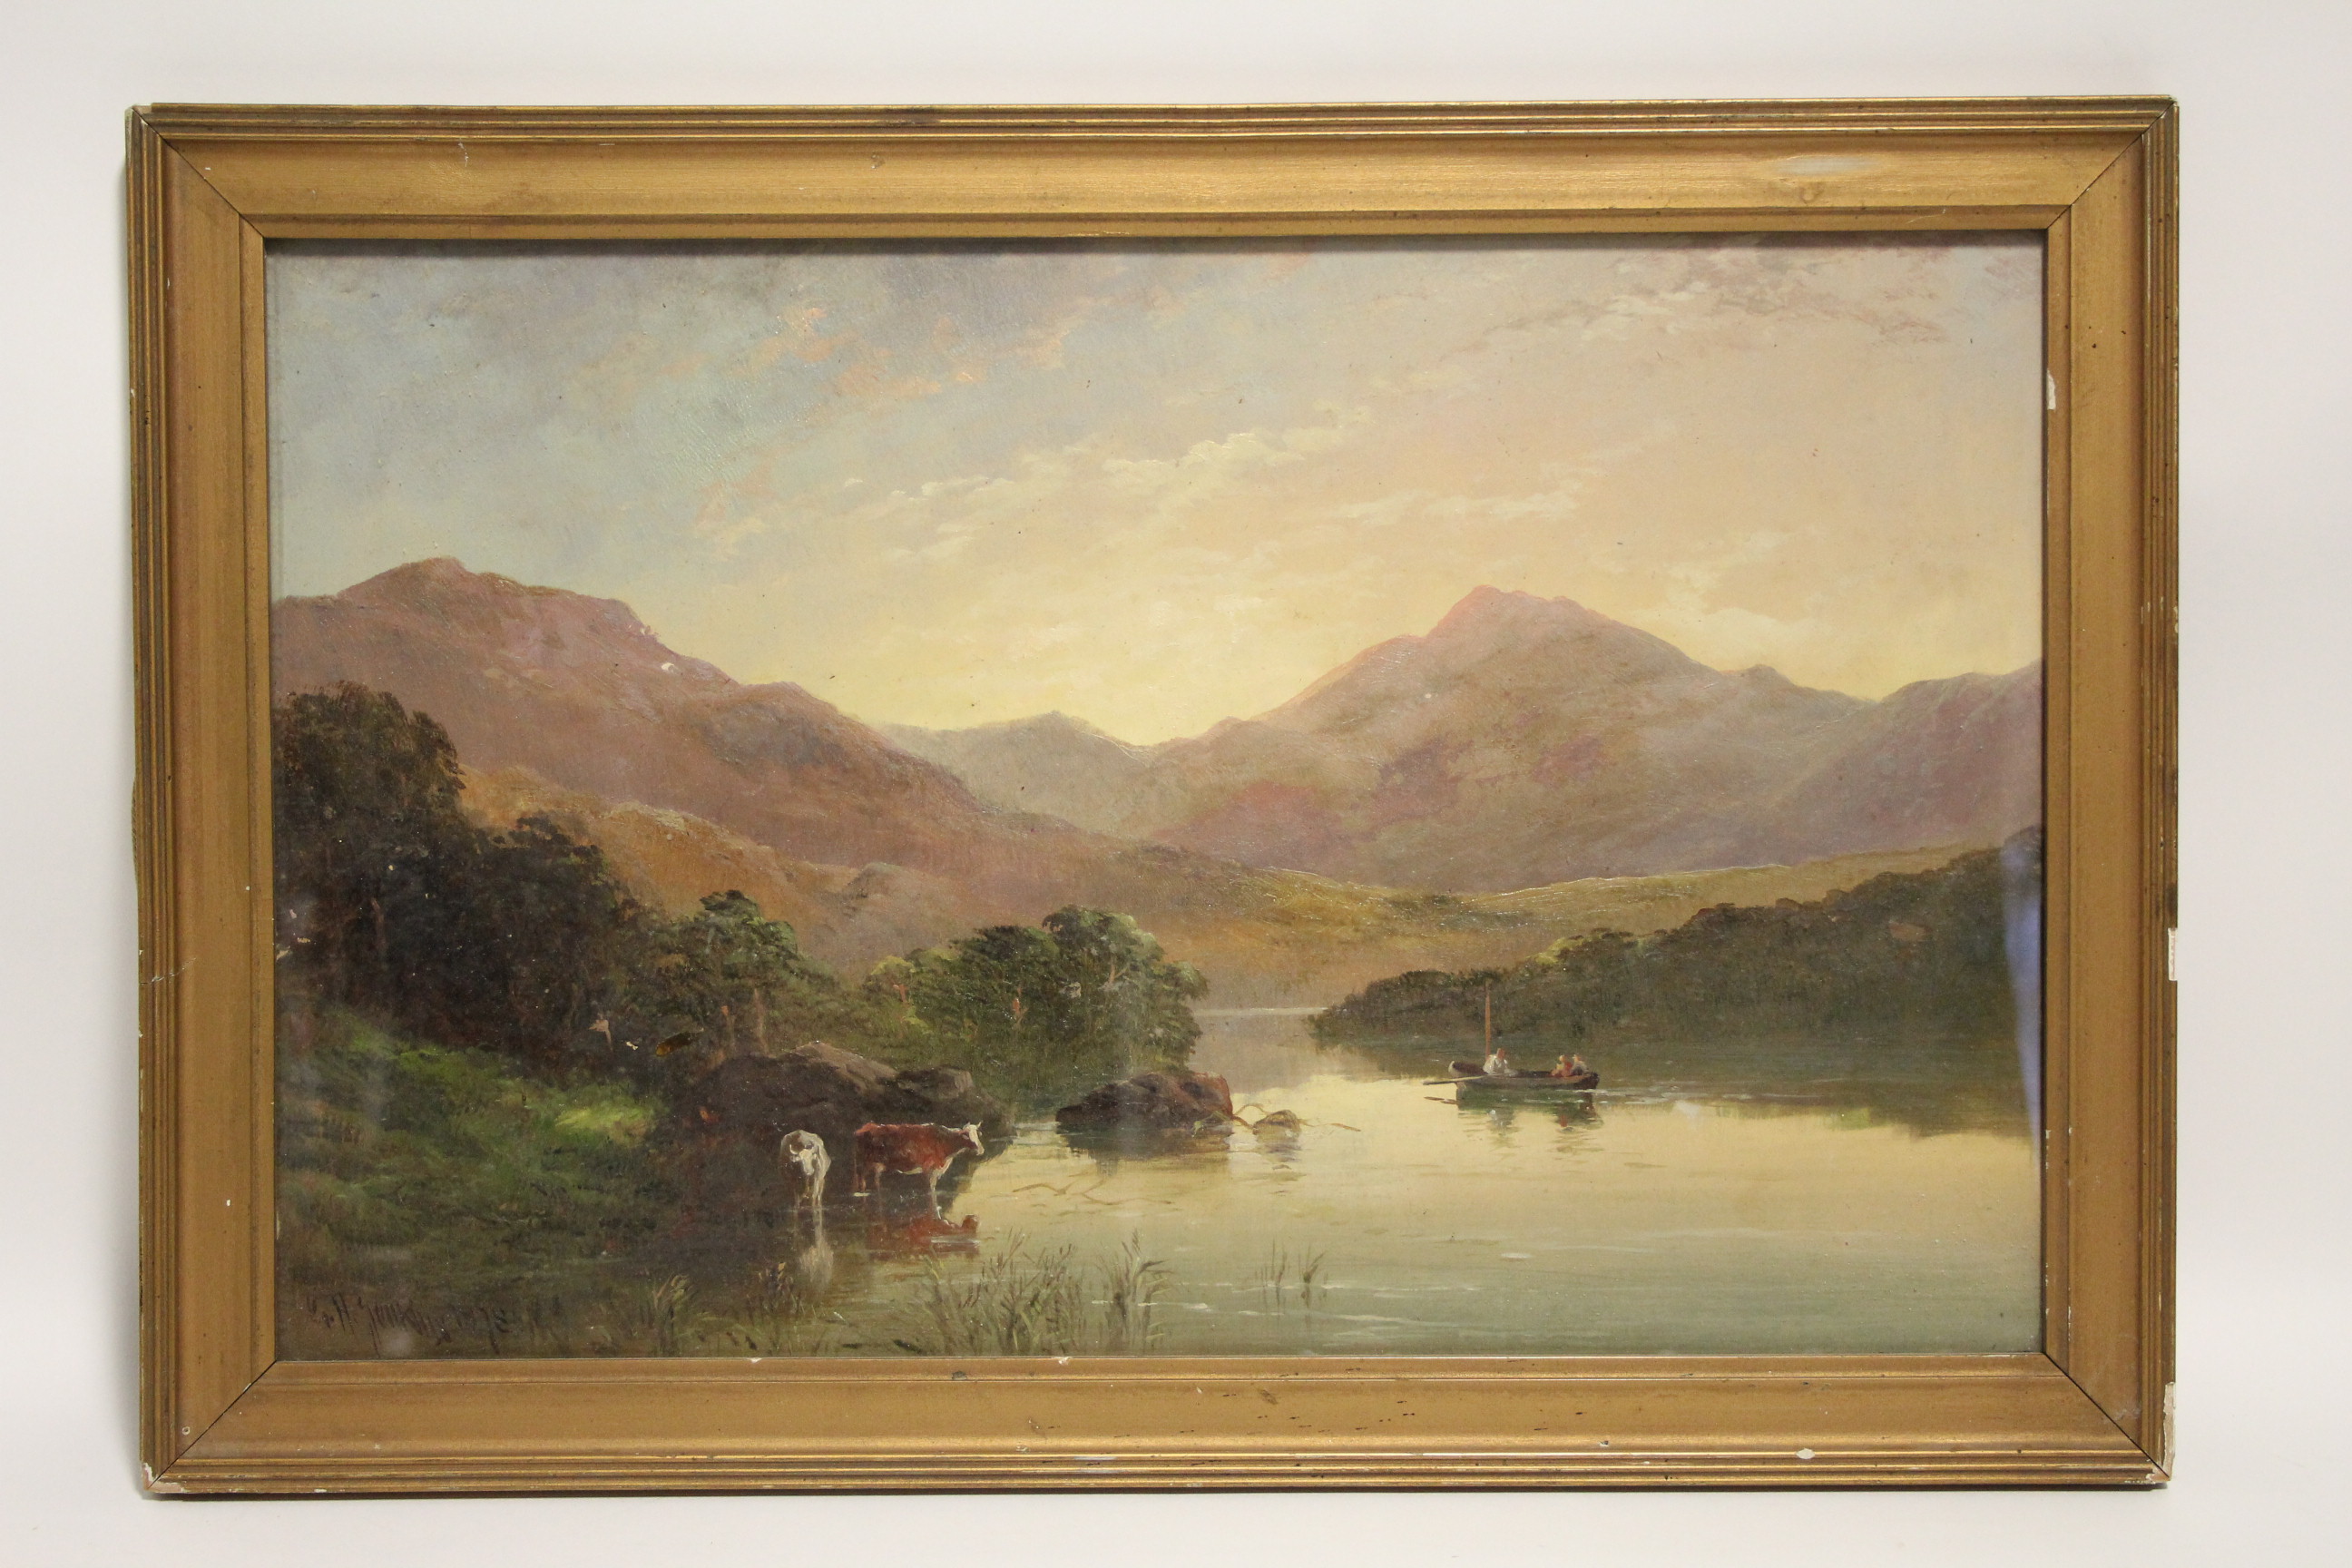 JENKINS, George Henry (1843-1914). A loch scene with figures in a rowing boat & cattle watering,